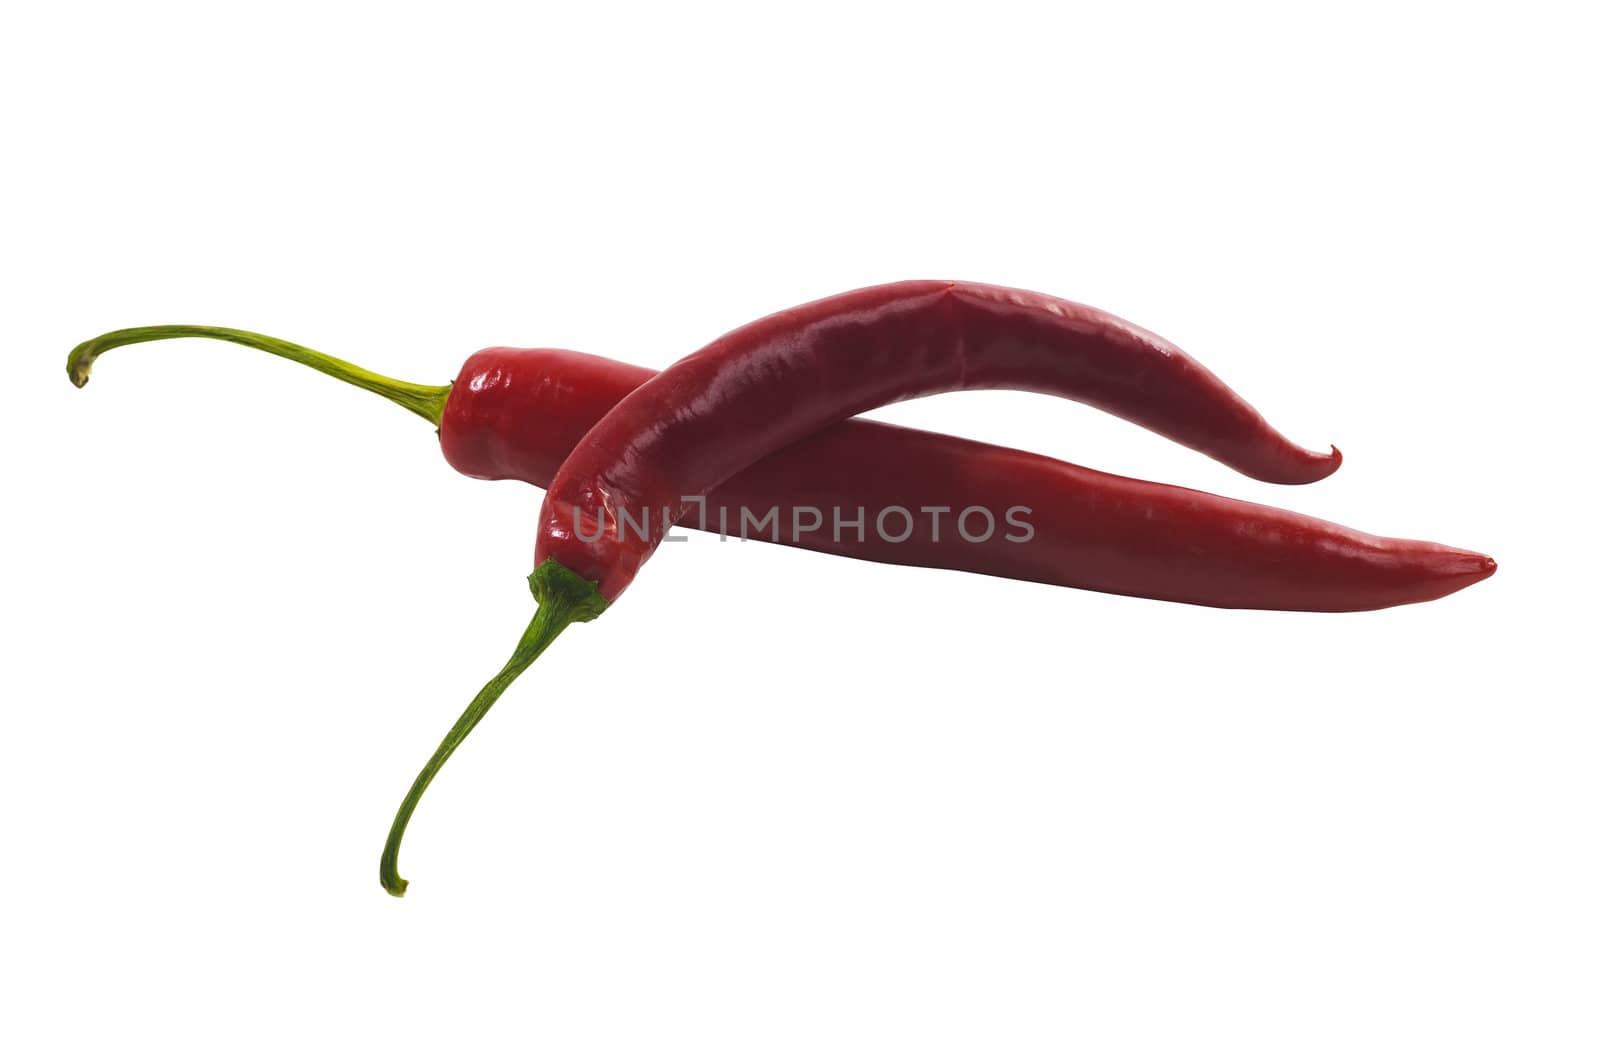 The hot red pepper isolated on white background